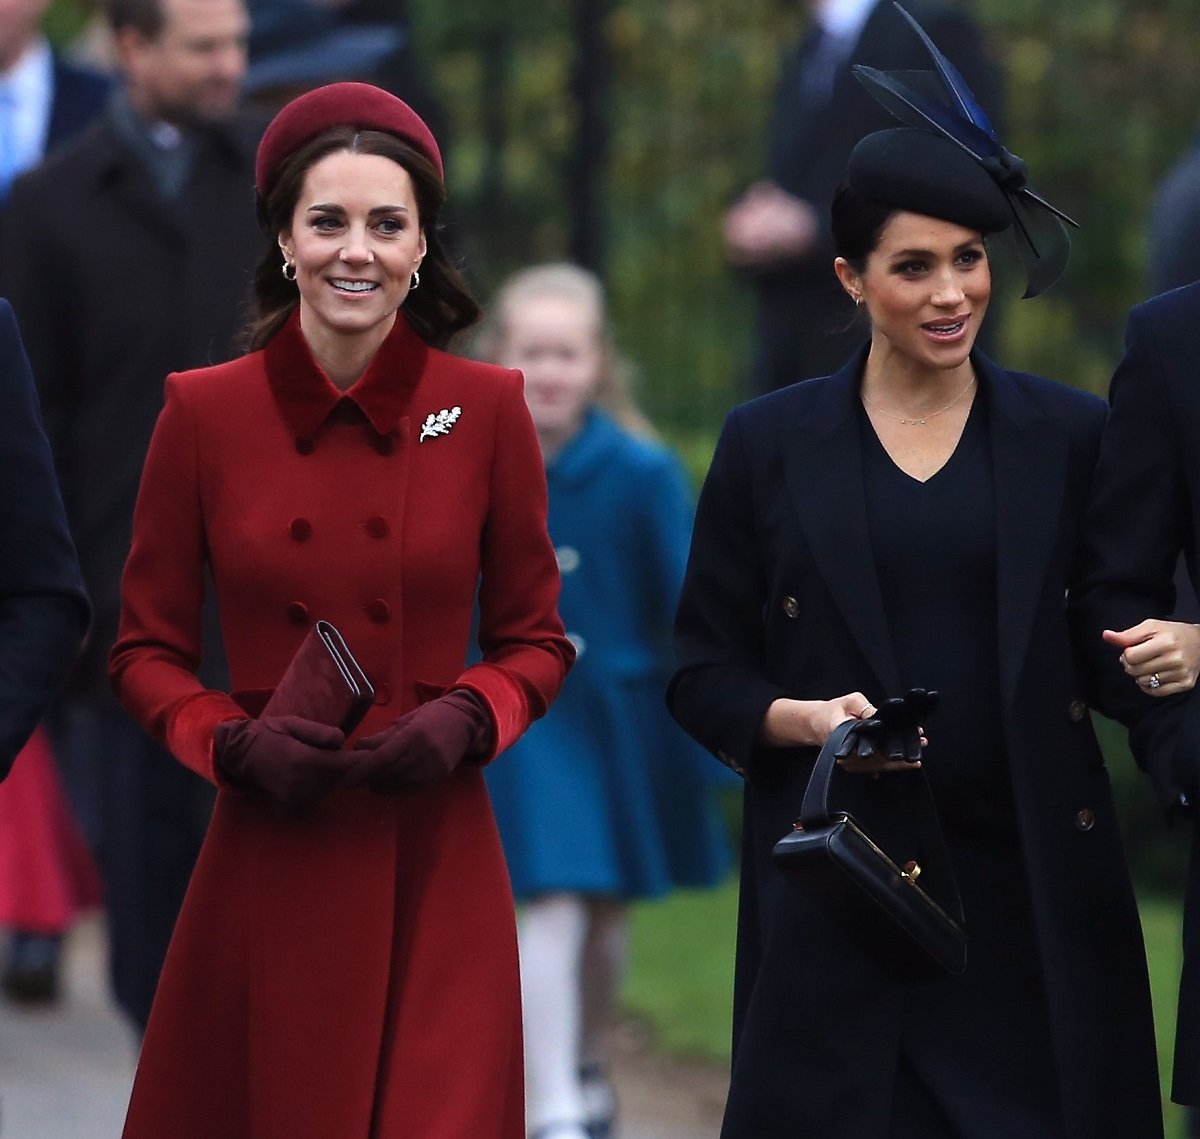 Kate Middleton and Meghan Markle arrive to attend Christmas Day Church service at Church of St. Mary Magdalene on the Sandringham estate